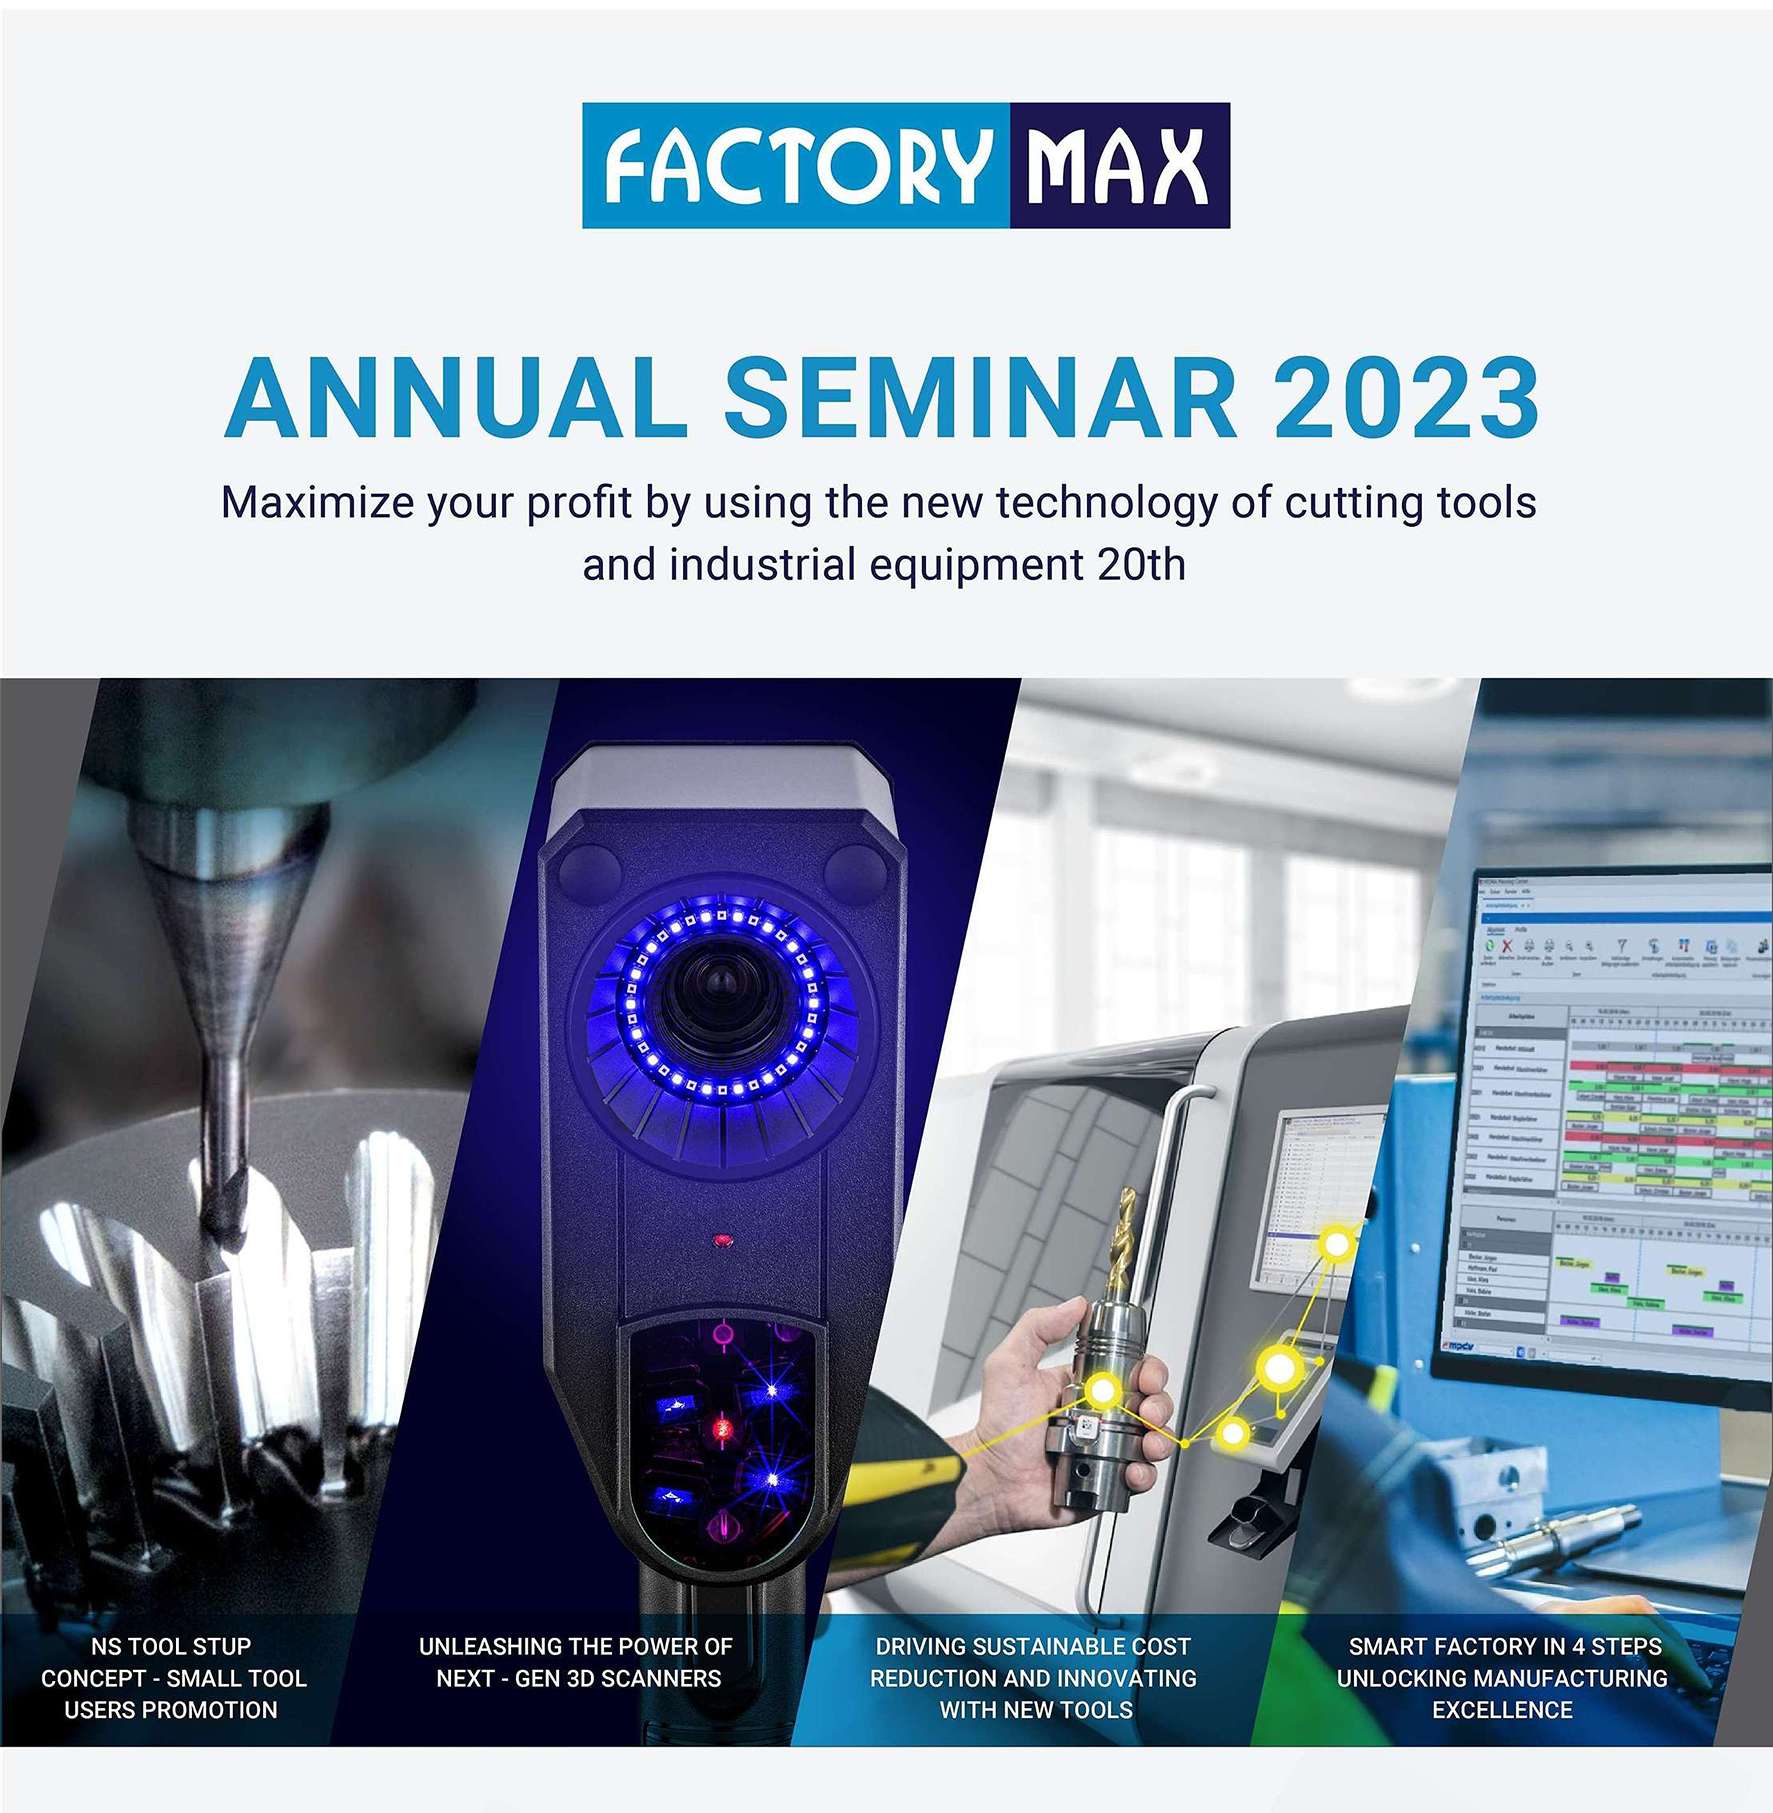 Factory Max, แฟ็คทอรี่ แม๊กซ์, สัมมนาฟรี 2566, Seminar, SMART FACTORY, NS Tool, 3D SCANNERS, Cost Reduction, Innovating, Cutting Tools, Maximize Your Profit by Using New Technology of Cutting Tool and Industrial Equipment 20th